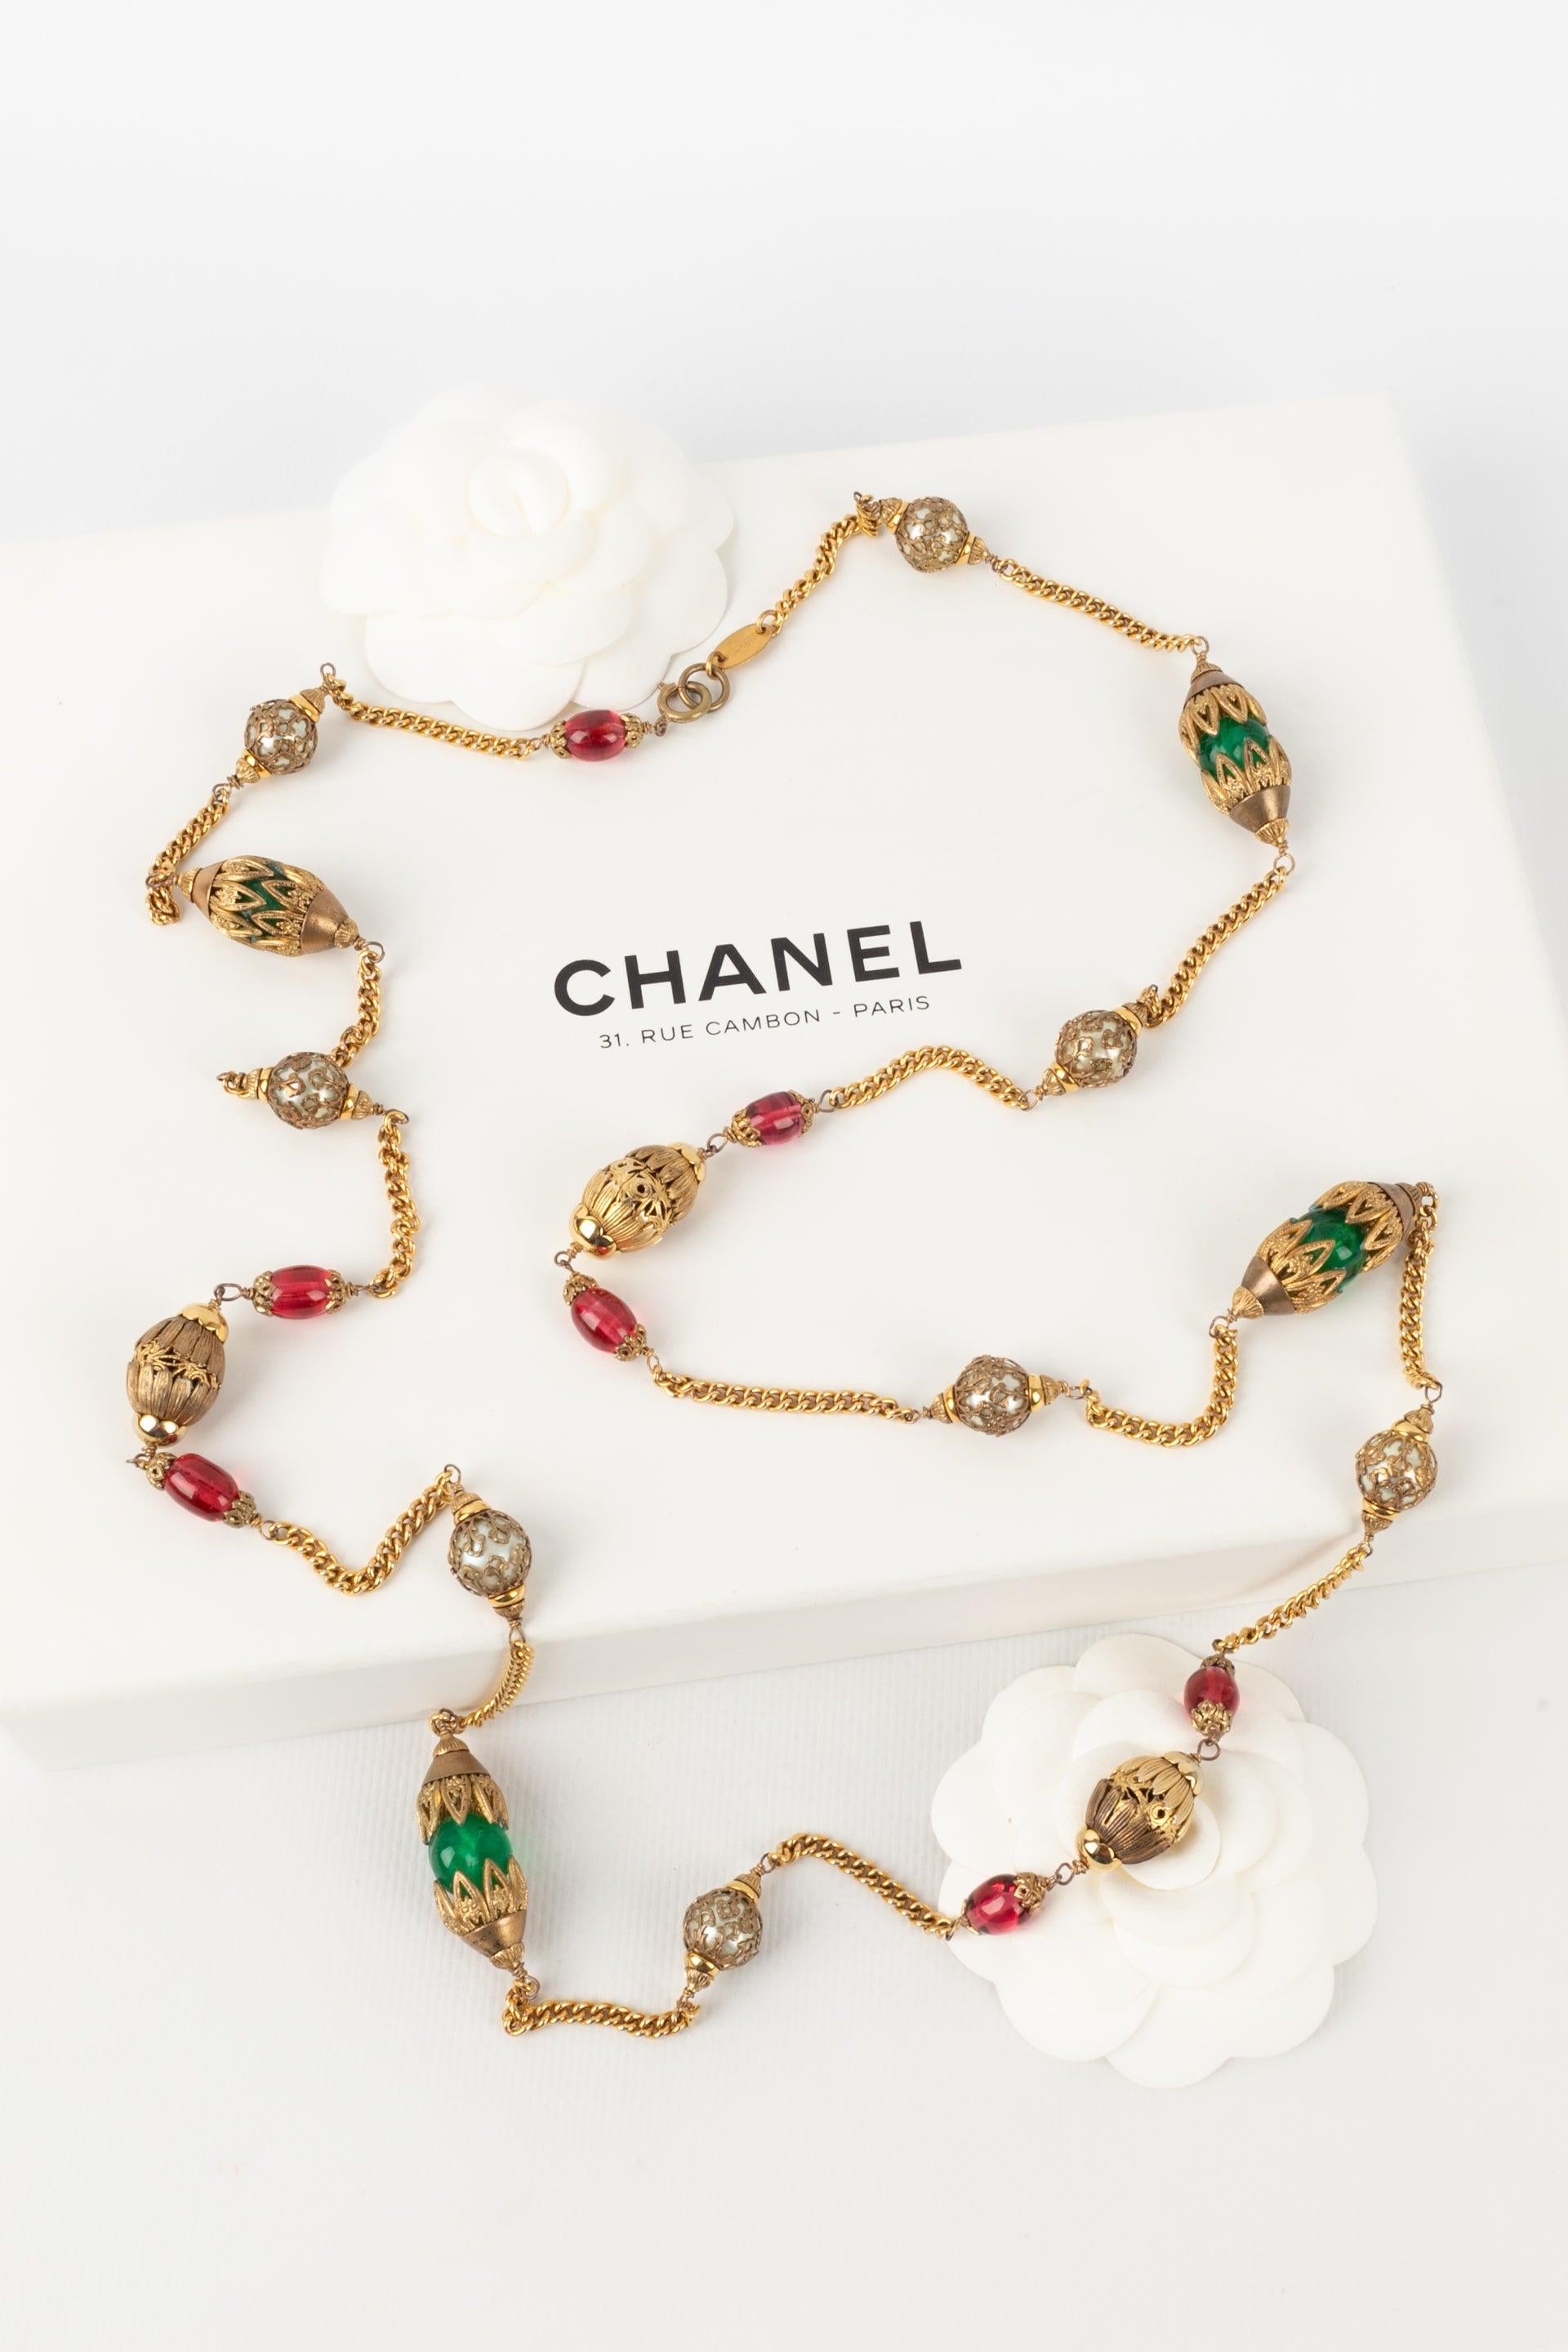 Chanel Golden Metal Necklace / Sautoir with Glass Pearls For Sale 5